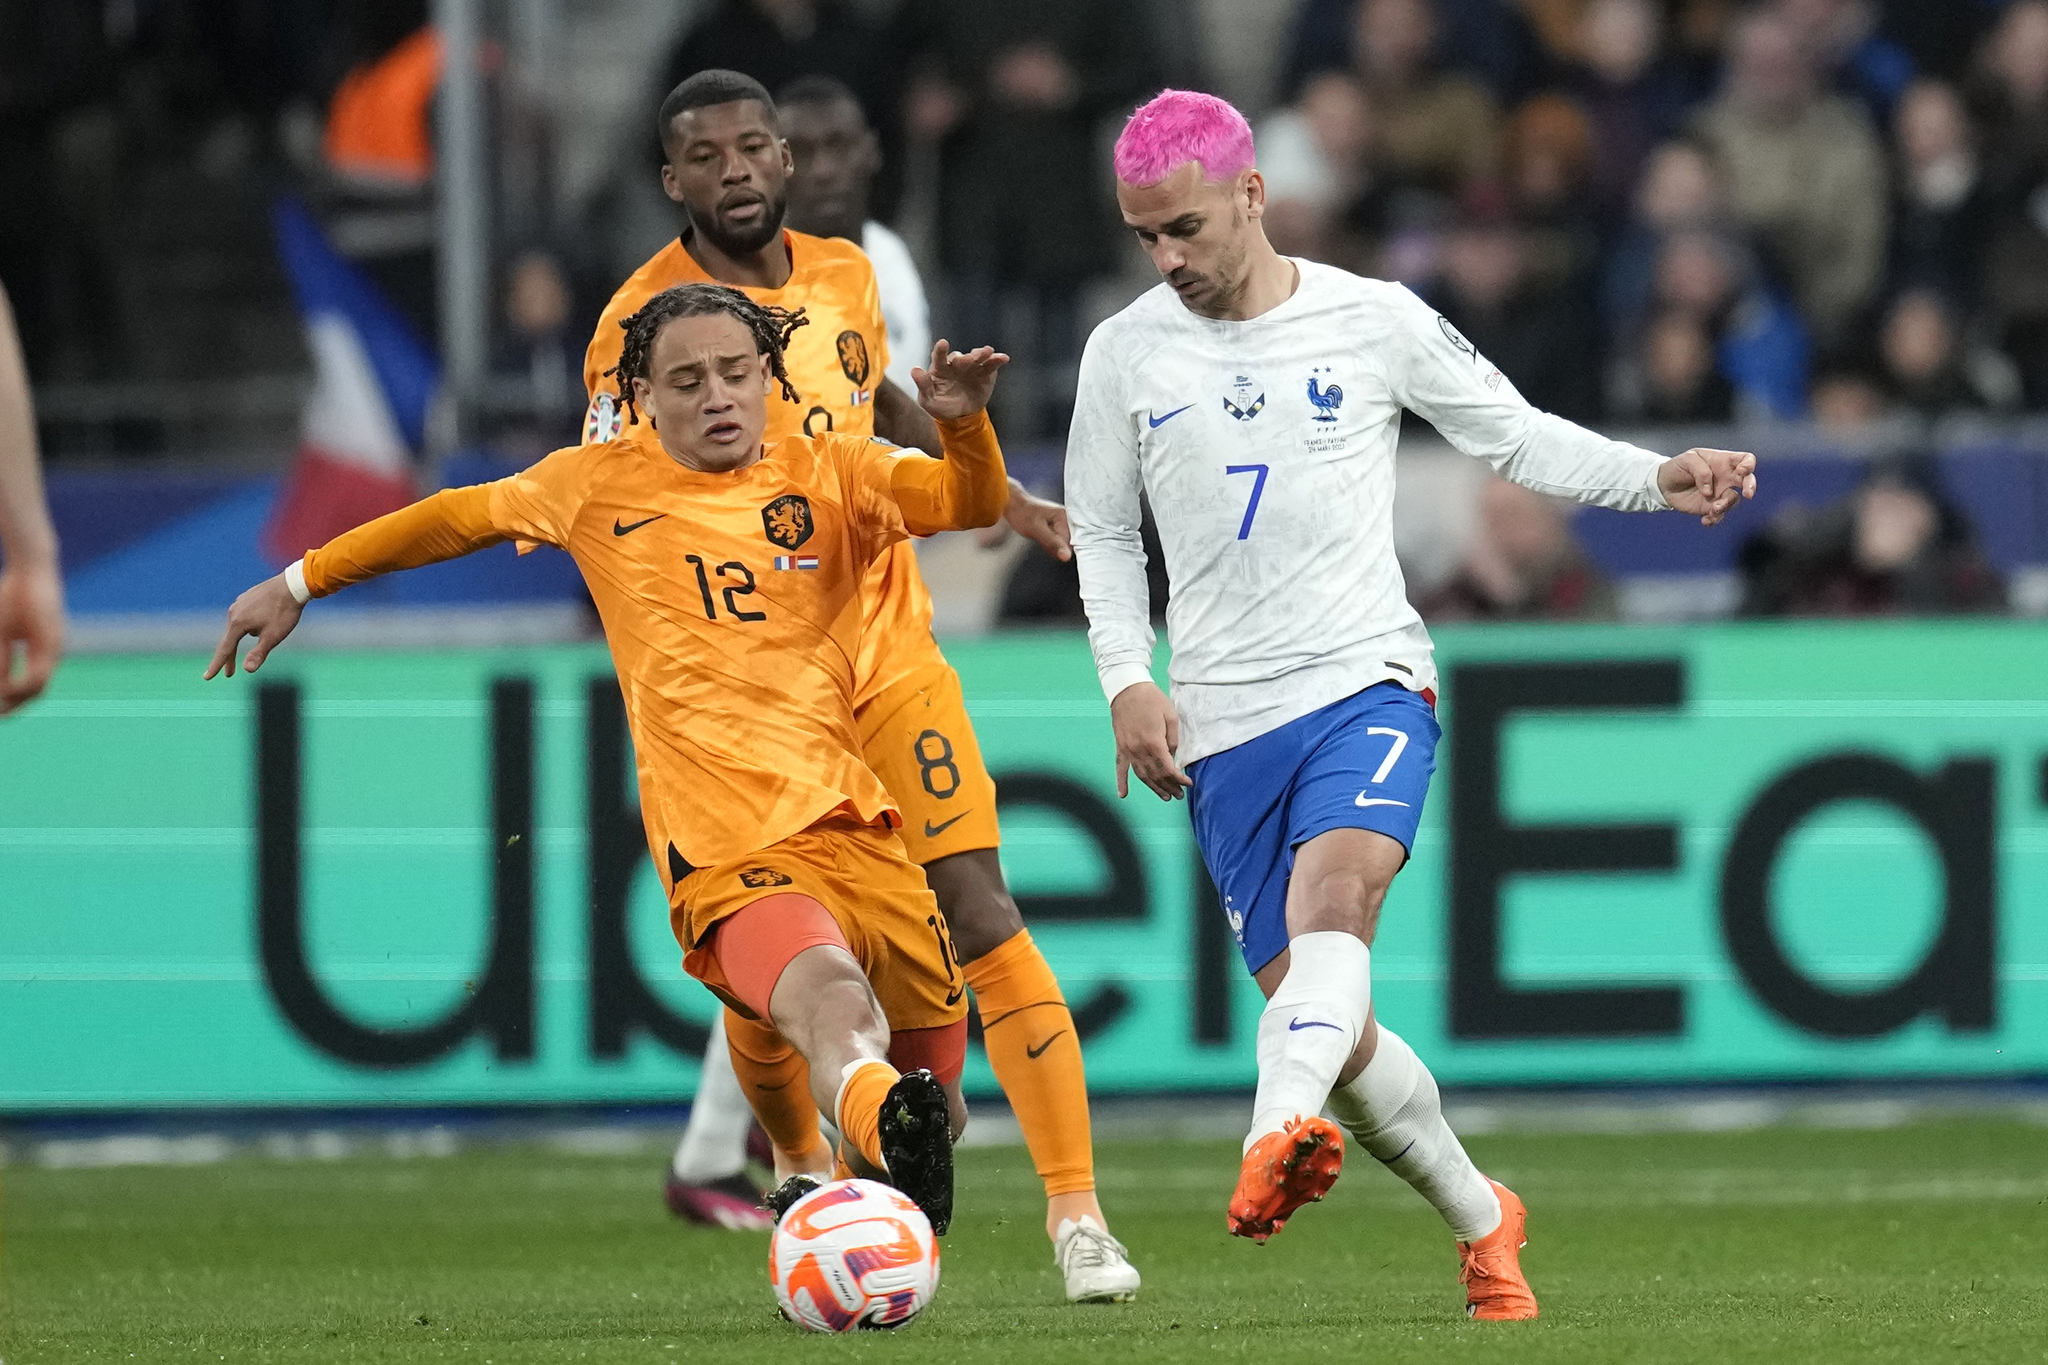  lt;HIT gt;France lt;/HIT gt;'s Antoine Griezmann, right, challenges for the ball with Netherlands' Xavi Simons during the Euro 2024 group B qualifying soccer match between  lt;HIT gt;France lt;/HIT gt; and the Netherlands at the Stade de  lt;HIT gt;France lt;/HIT gt; in Saint Denis, outside Paris,  lt;HIT gt;France lt;/HIT gt;, Friday, March 24, 2023. (AP Photo/Christophe Ena)